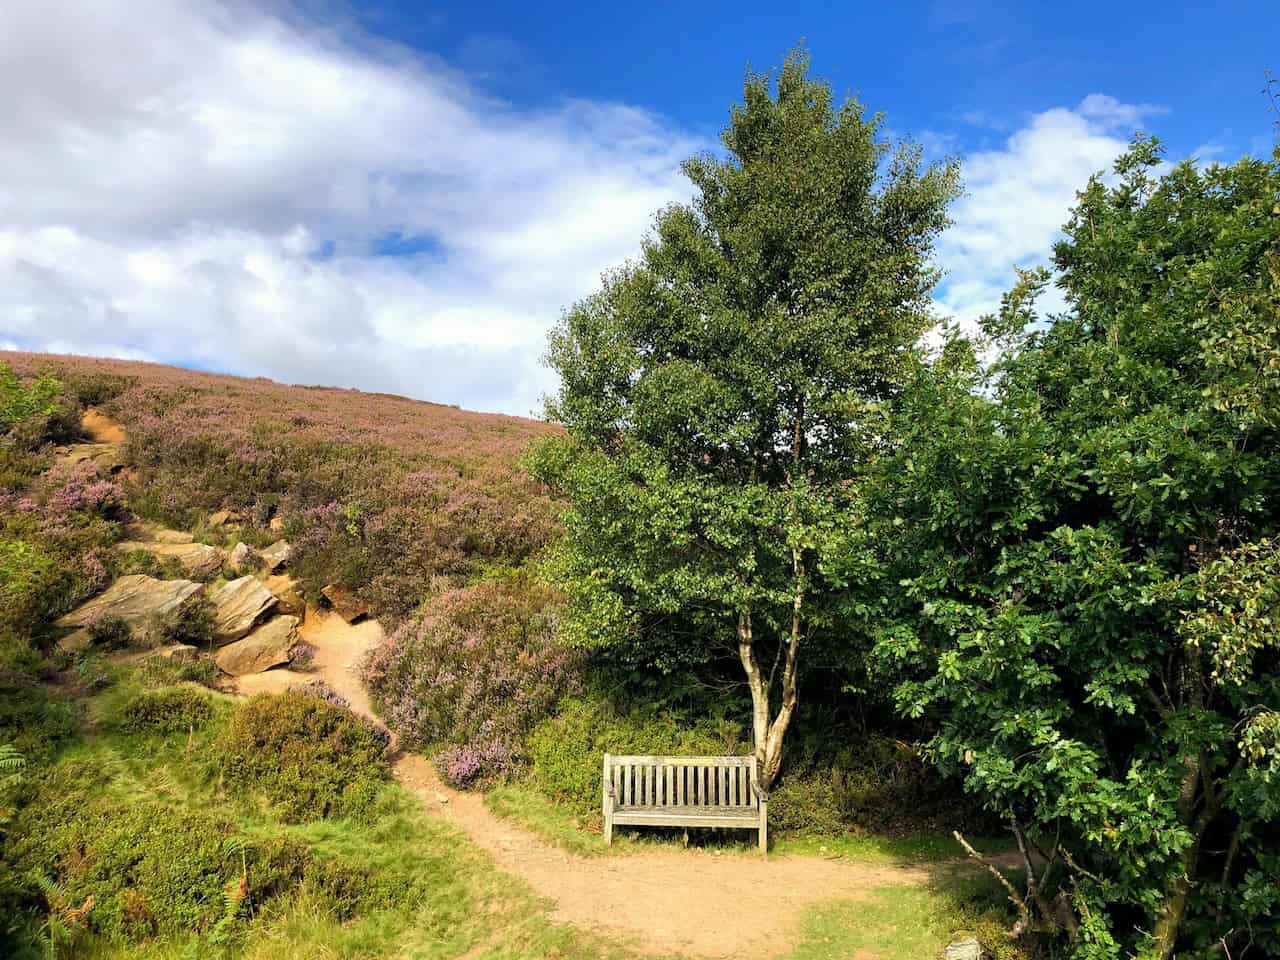 A lovely, sheltered resting place on Great Hograh Moor, in a small ravine created by Great Hograh Beck, offers a peaceful respite.